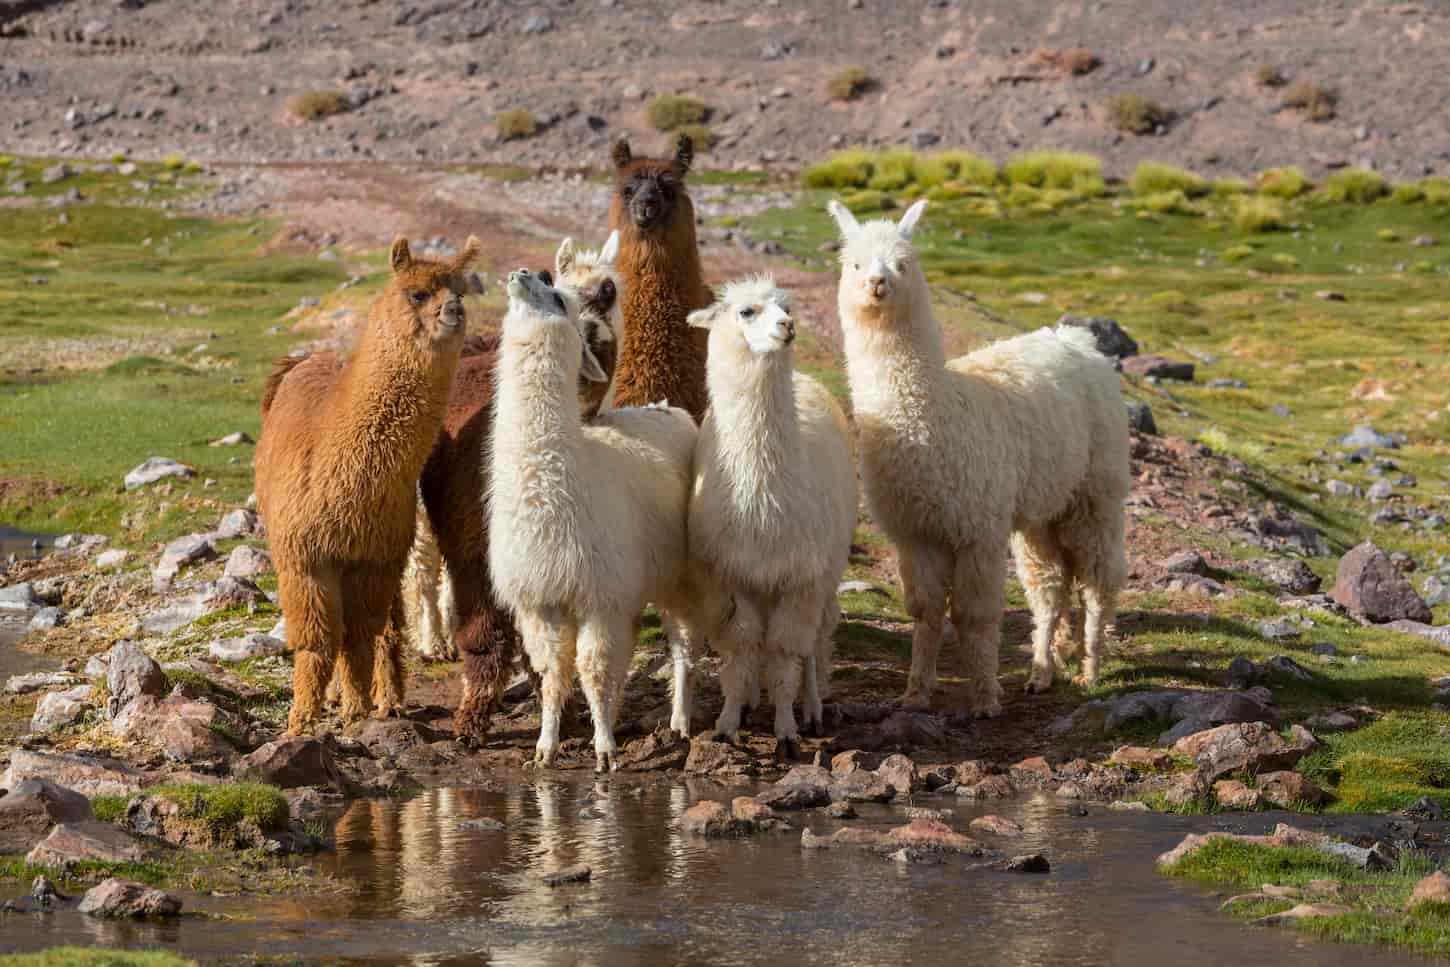 An image of a group of llamas standing in front of a water stream and looking at the camera.